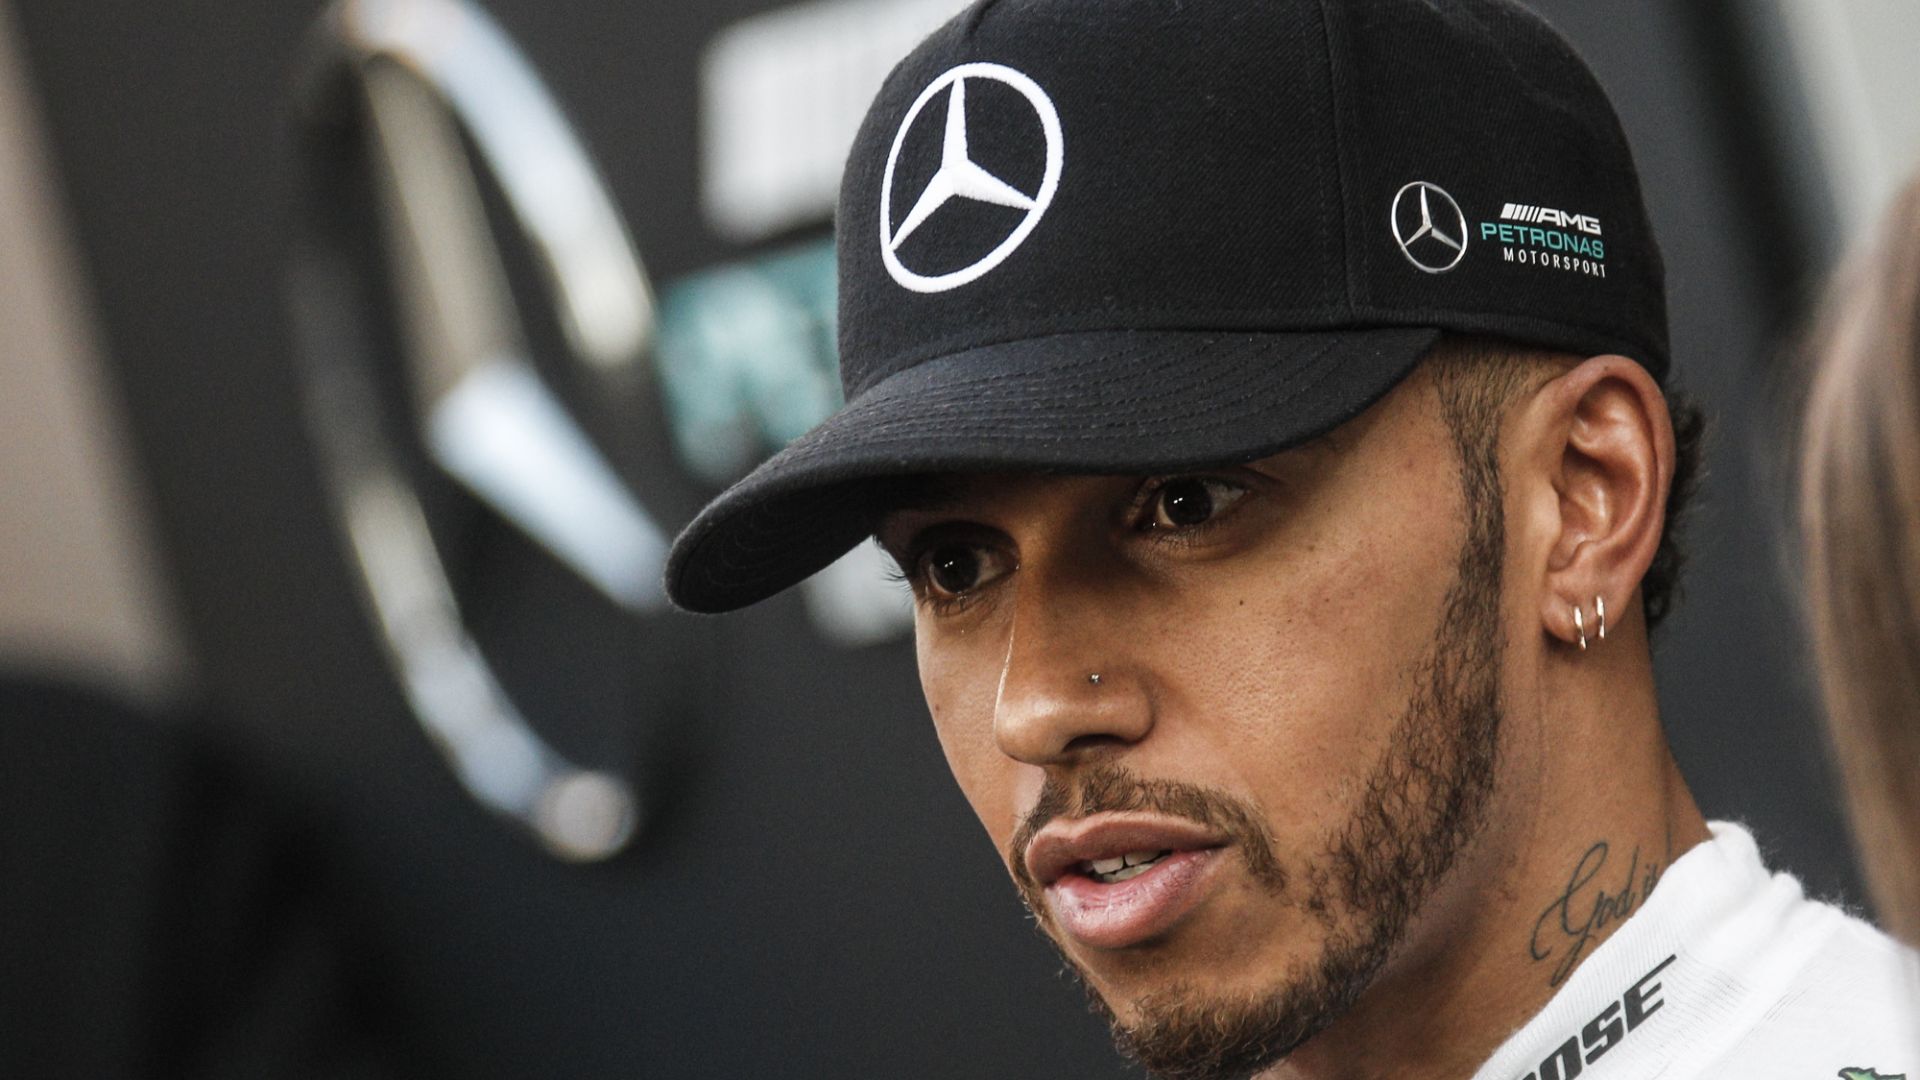 Lewis Hamilton invests in meat-free burger chain